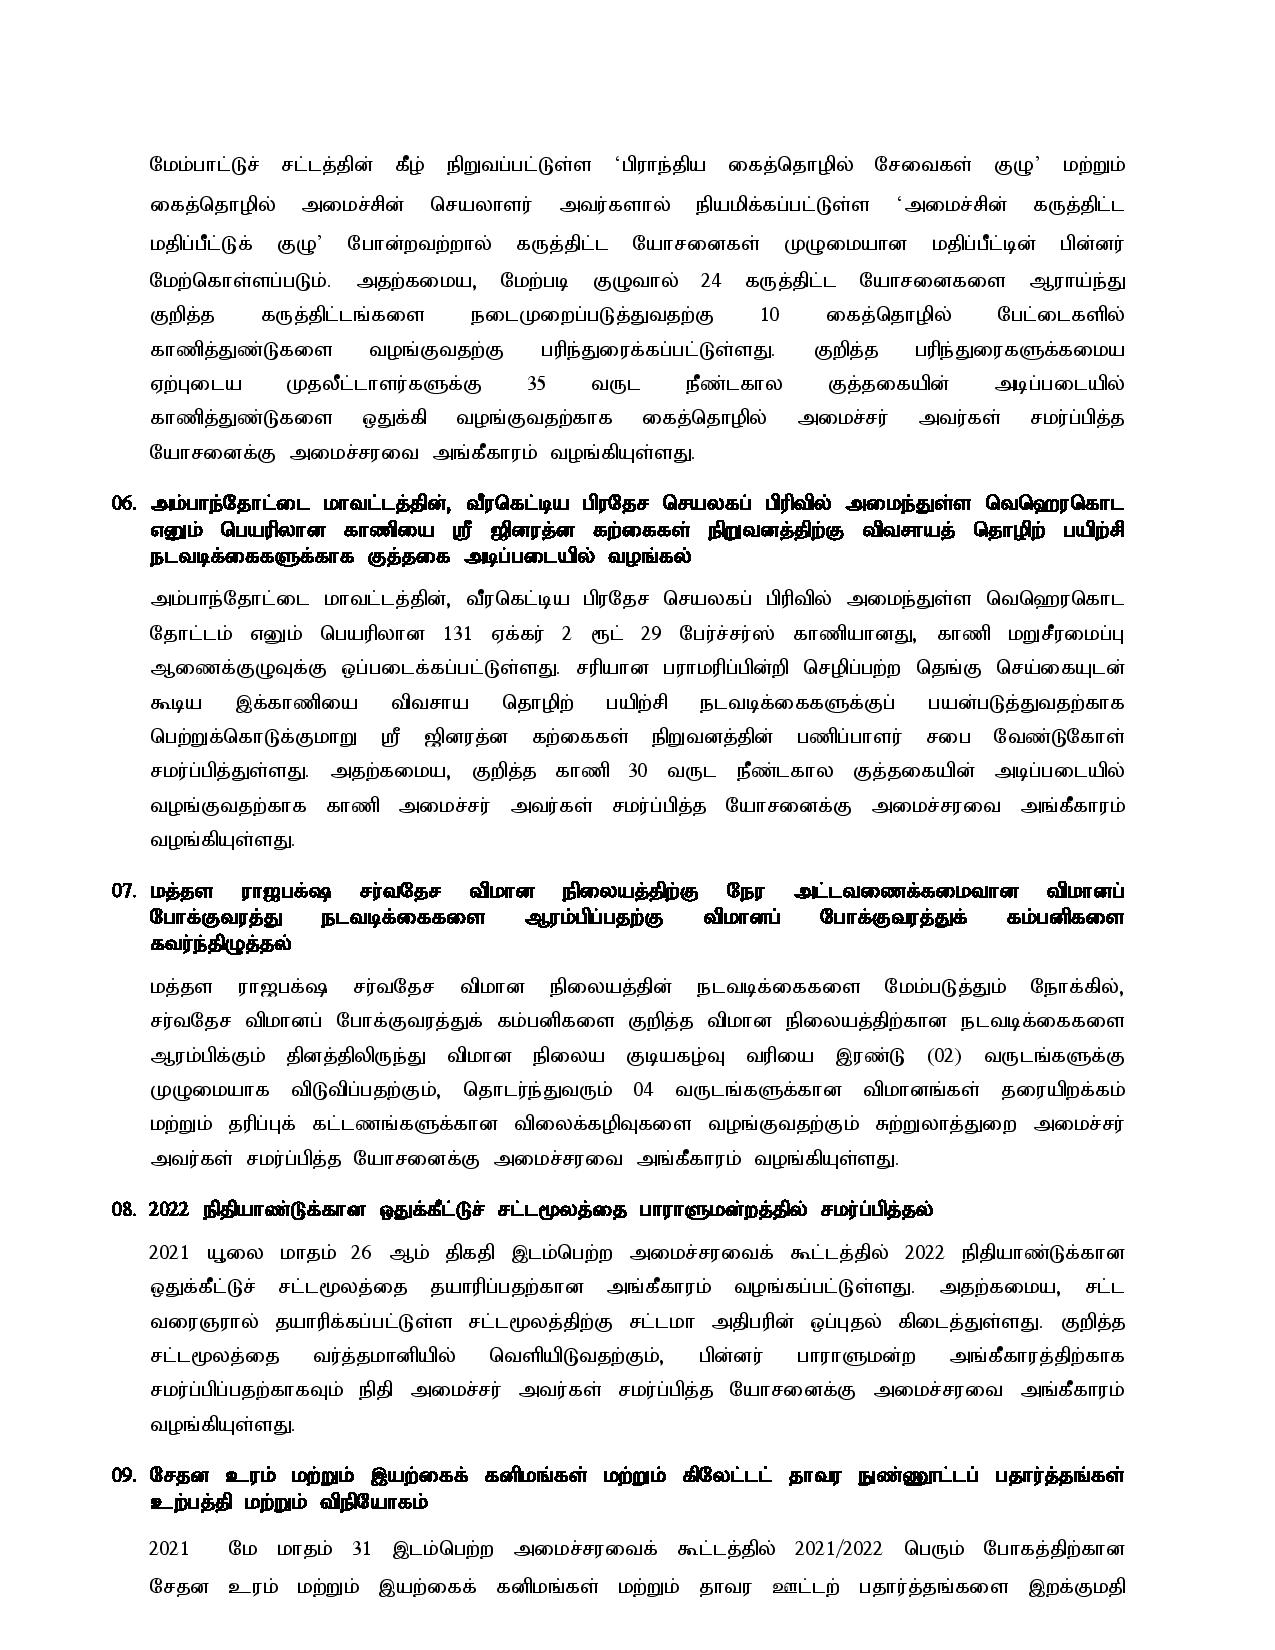 Cabinet Decisions on 27.09.2021 Tamil page 003